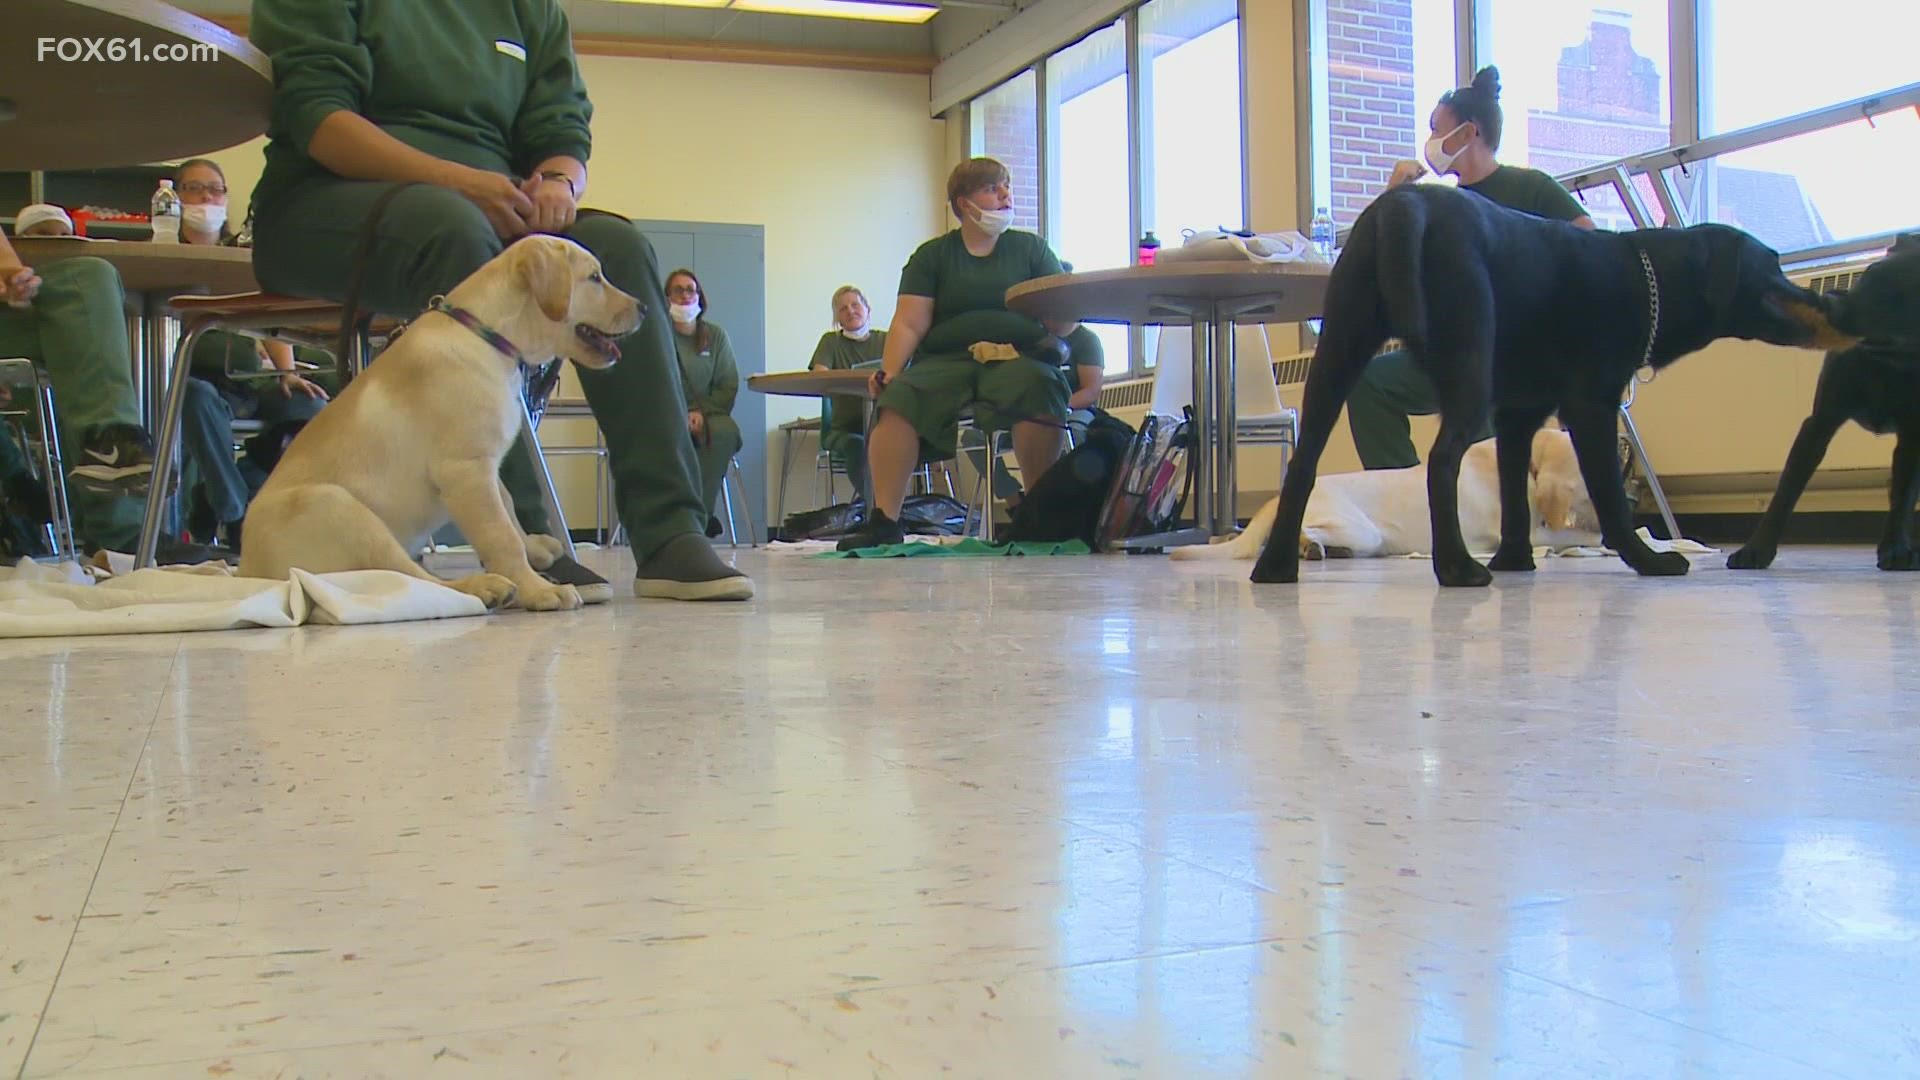 The program works with inmates in New York and New Jersey to train new service dogs donated across the country.